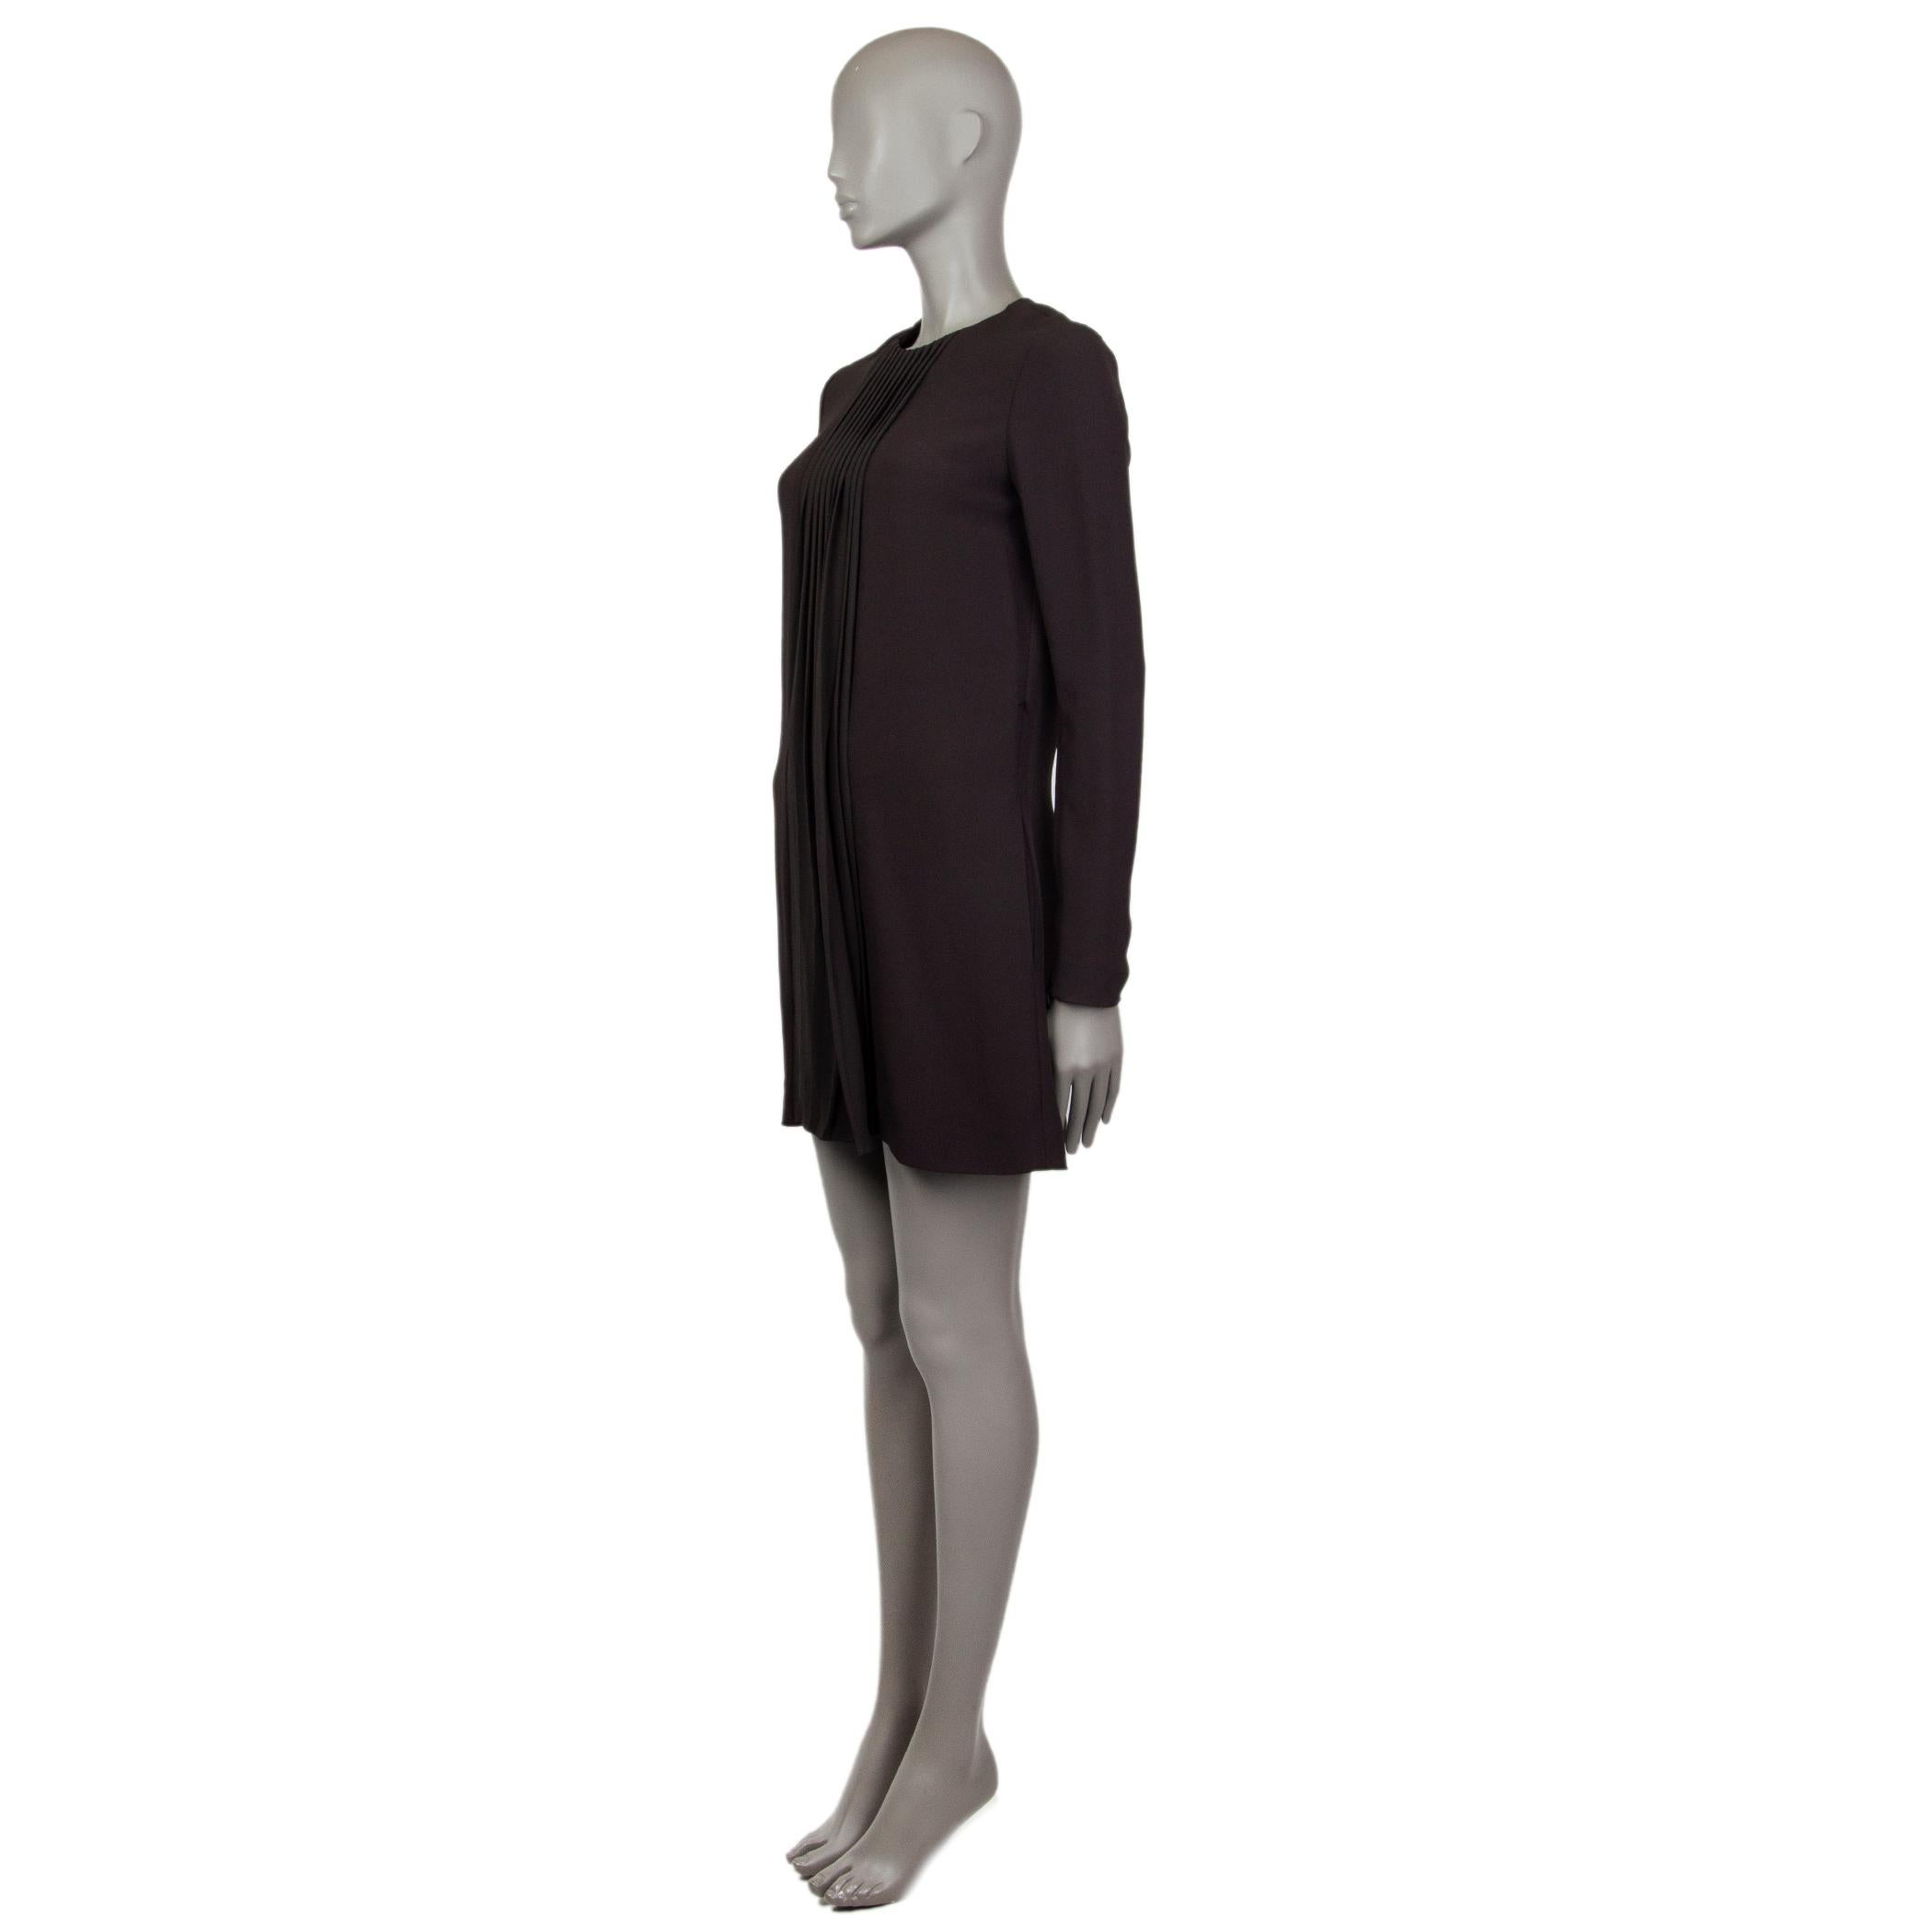 100% authentic Chloé long-sleeve shift dress in black viscose (53%) and acitate (47%). With pleated panel on the center front and two slit pockets on the sides. Features invisible zipper along the inner sleeves. Closes with a hock and has an